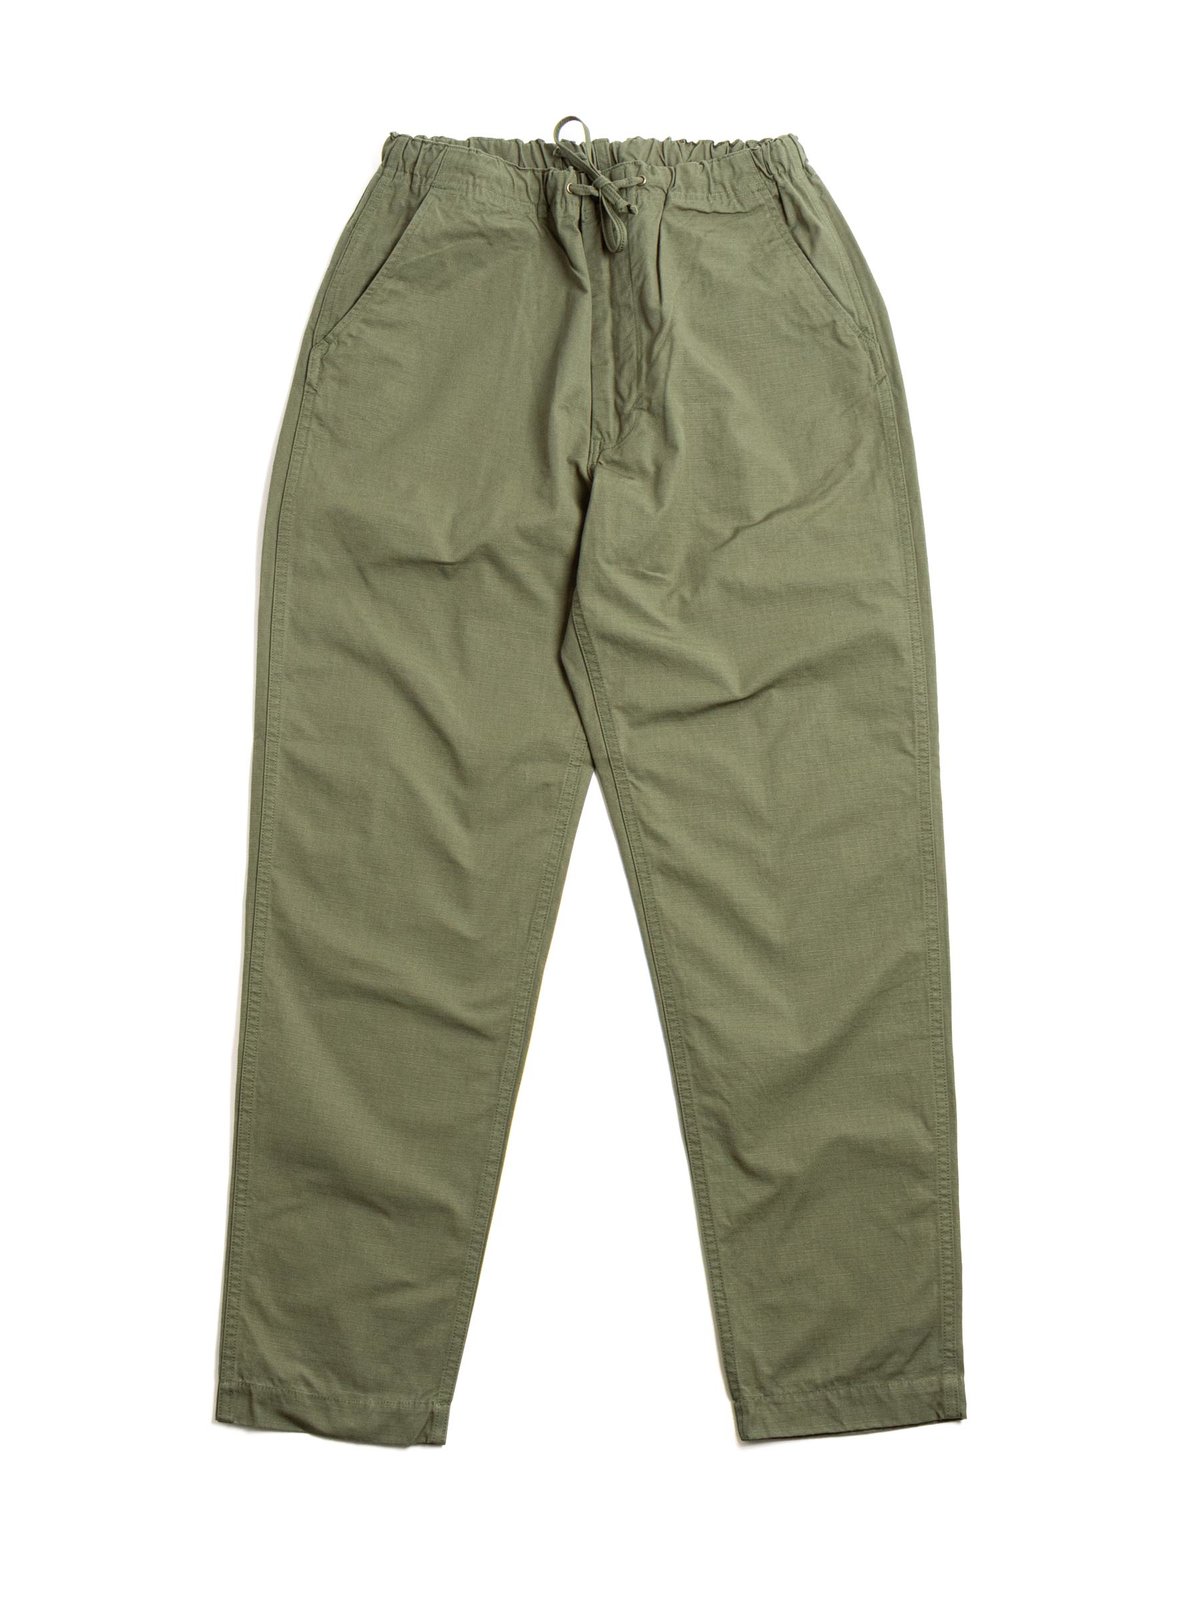 NEW YORKER PANT ARMY RIPSTOP - Image 1